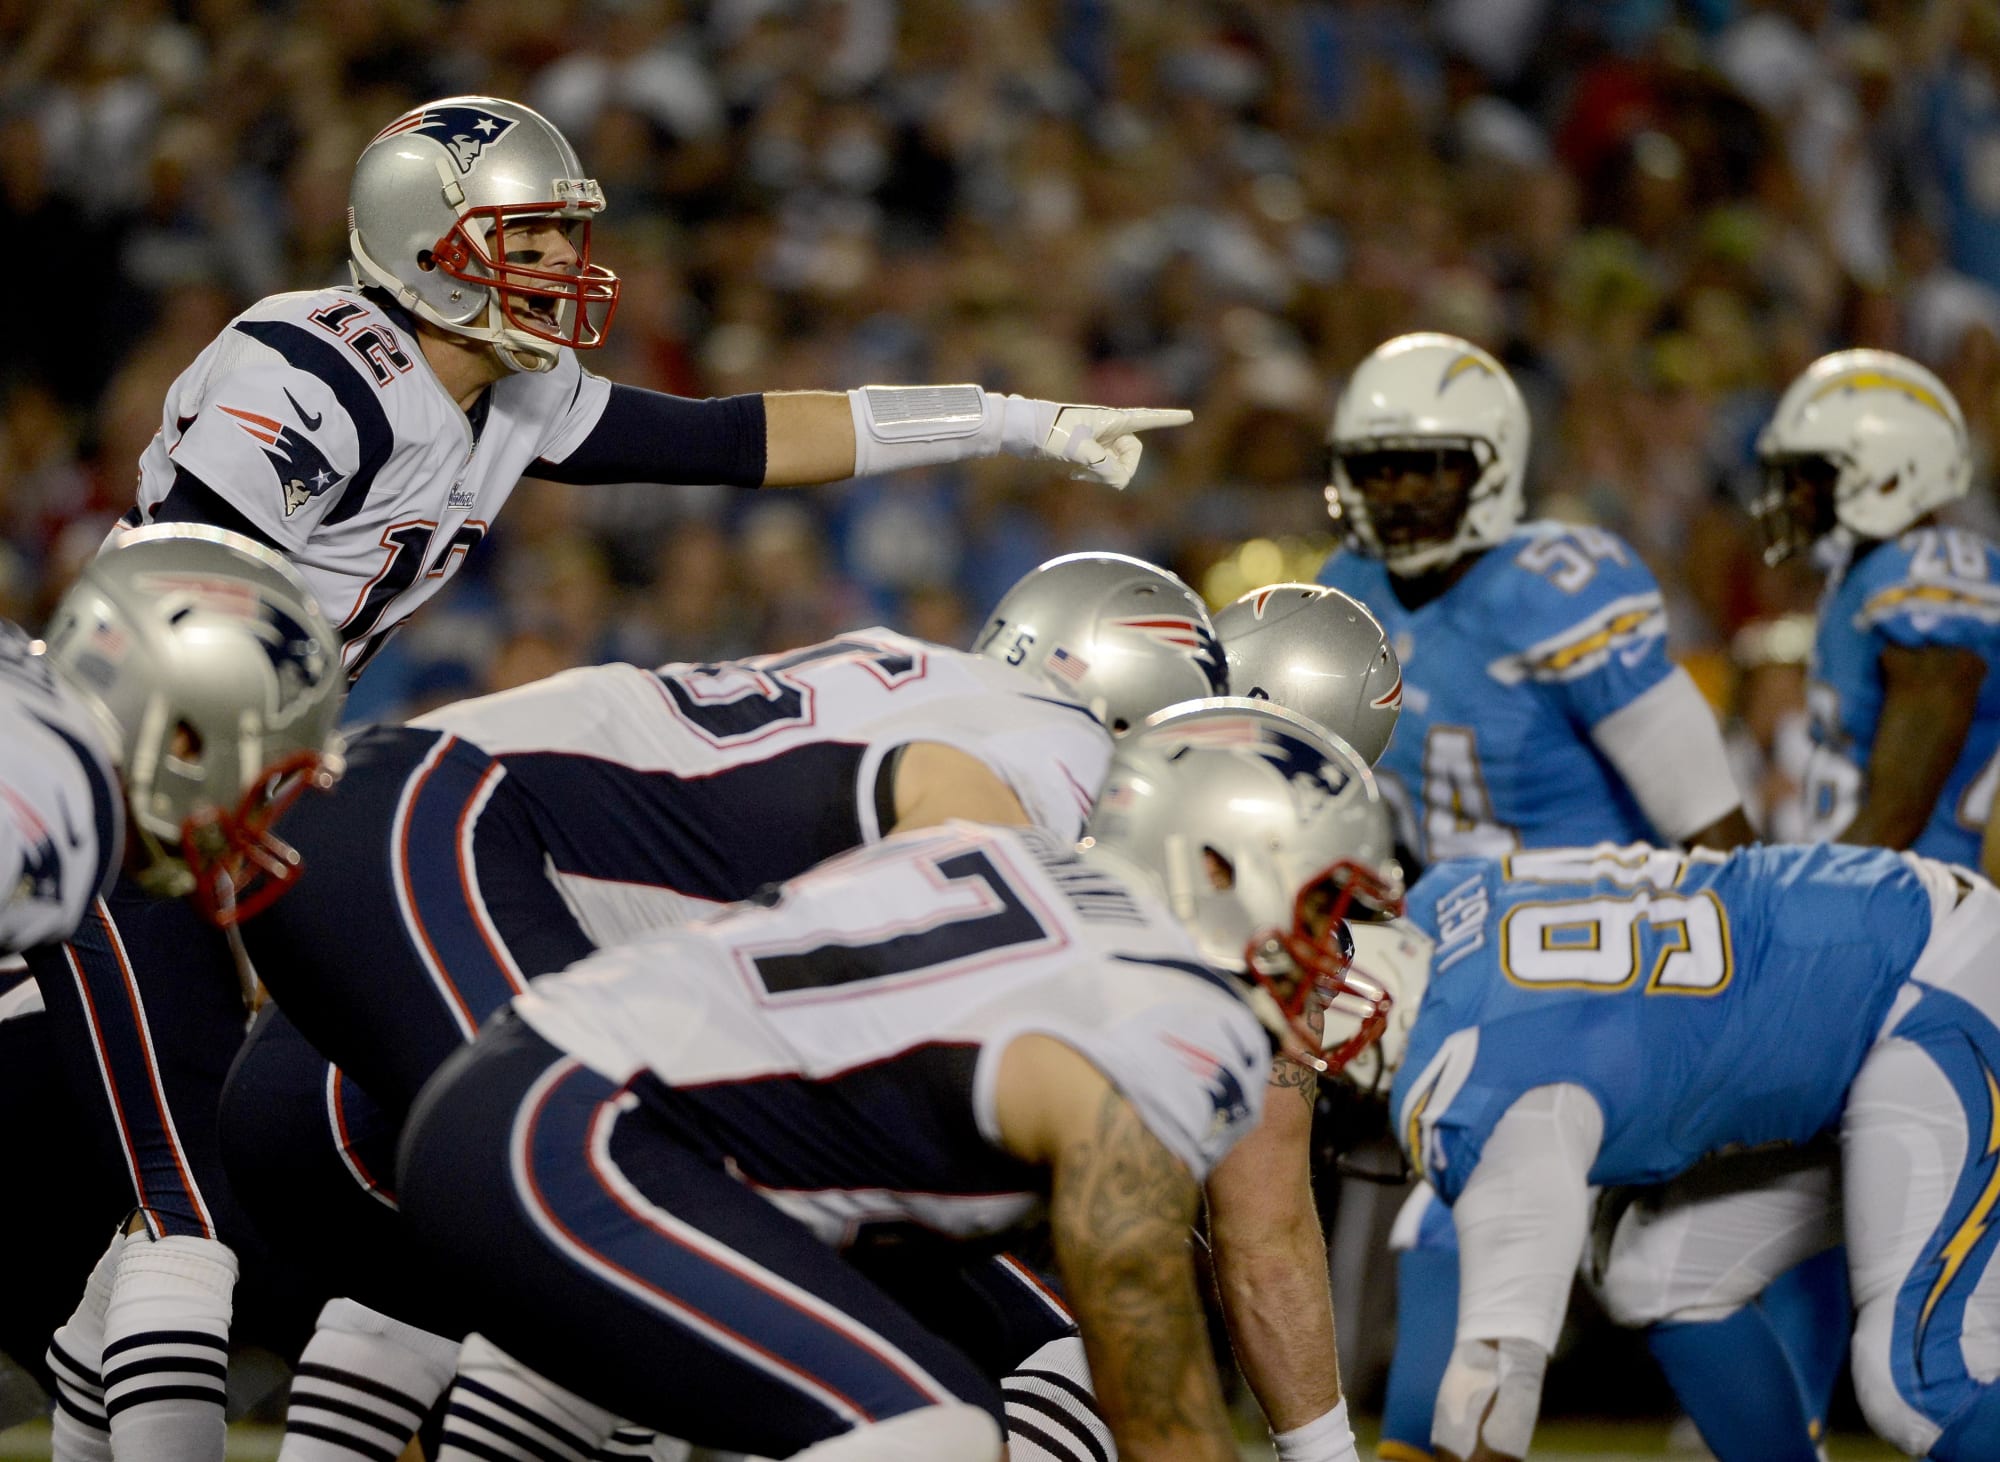 New England Patriots vs Los Angeles Chargers: Watch NFL online